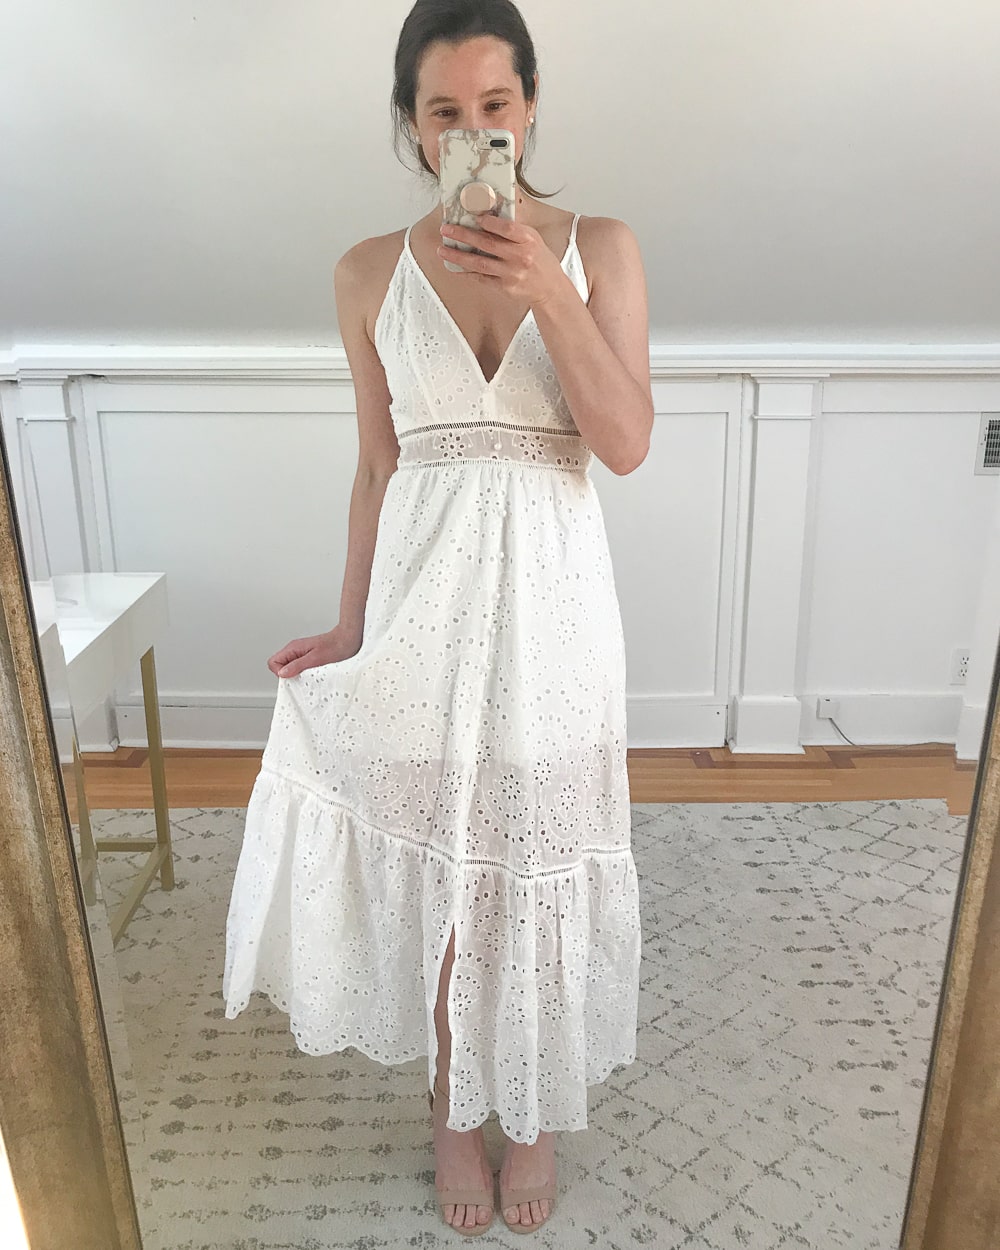 Affordable fashion blogger Stephanie Ziajka tries on an Amazon BerryGo Women's Embroidery Pearl Button Down Dress V Neck Spaghetti Strap Maxi Dress as part of her 4th of July Amazon try-on haul on Diary of a Debutante